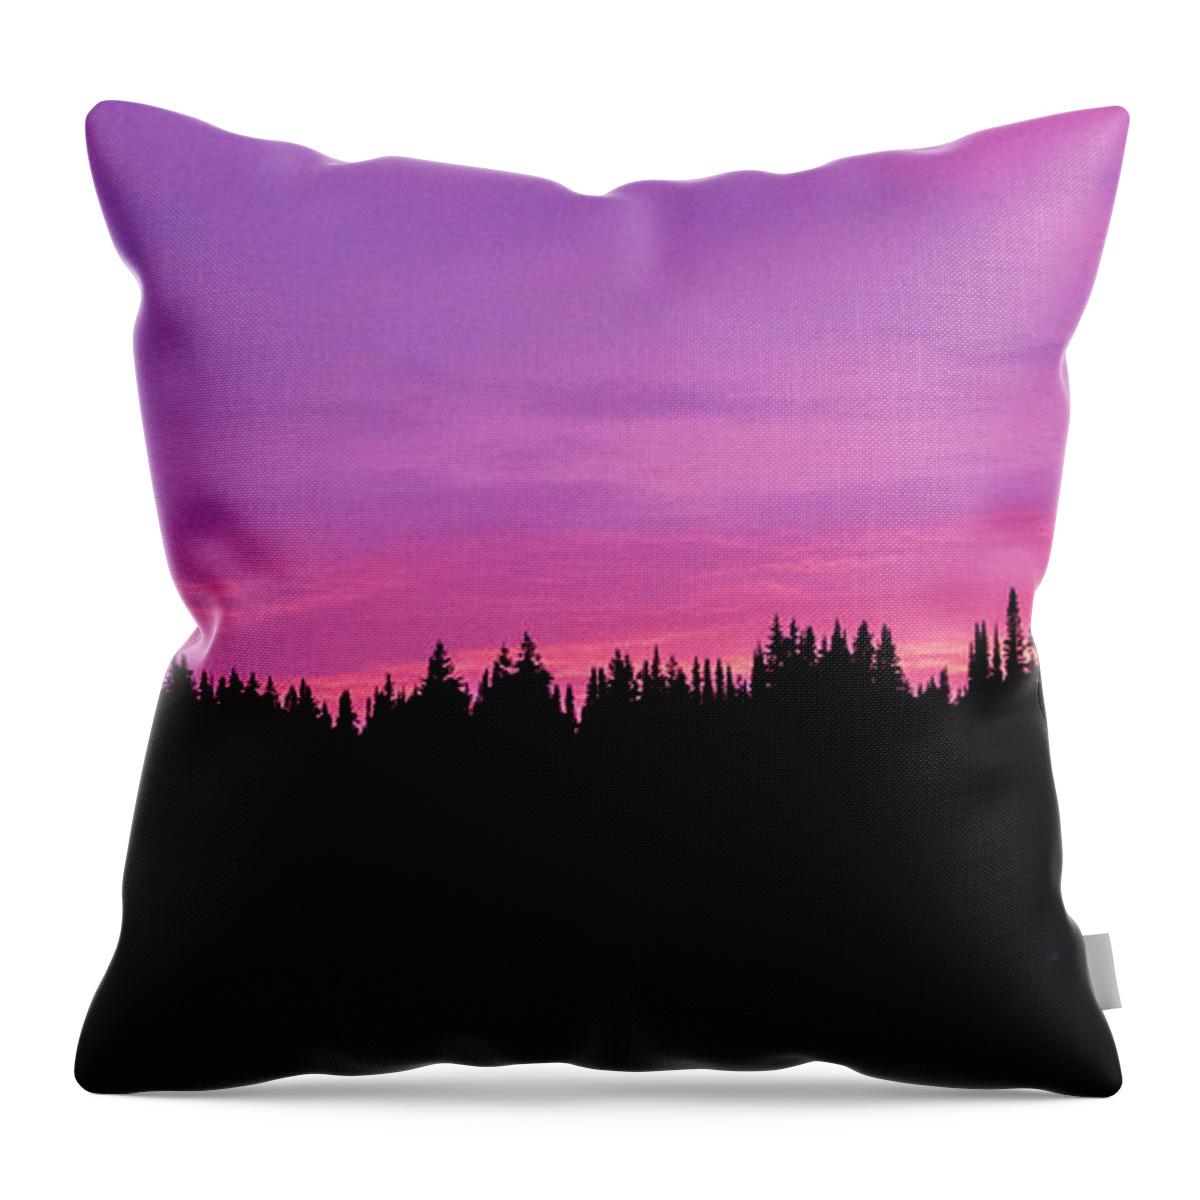 Landscape Throw Pillow featuring the photograph Dumont Cotton Candy by Kevin Dietrich